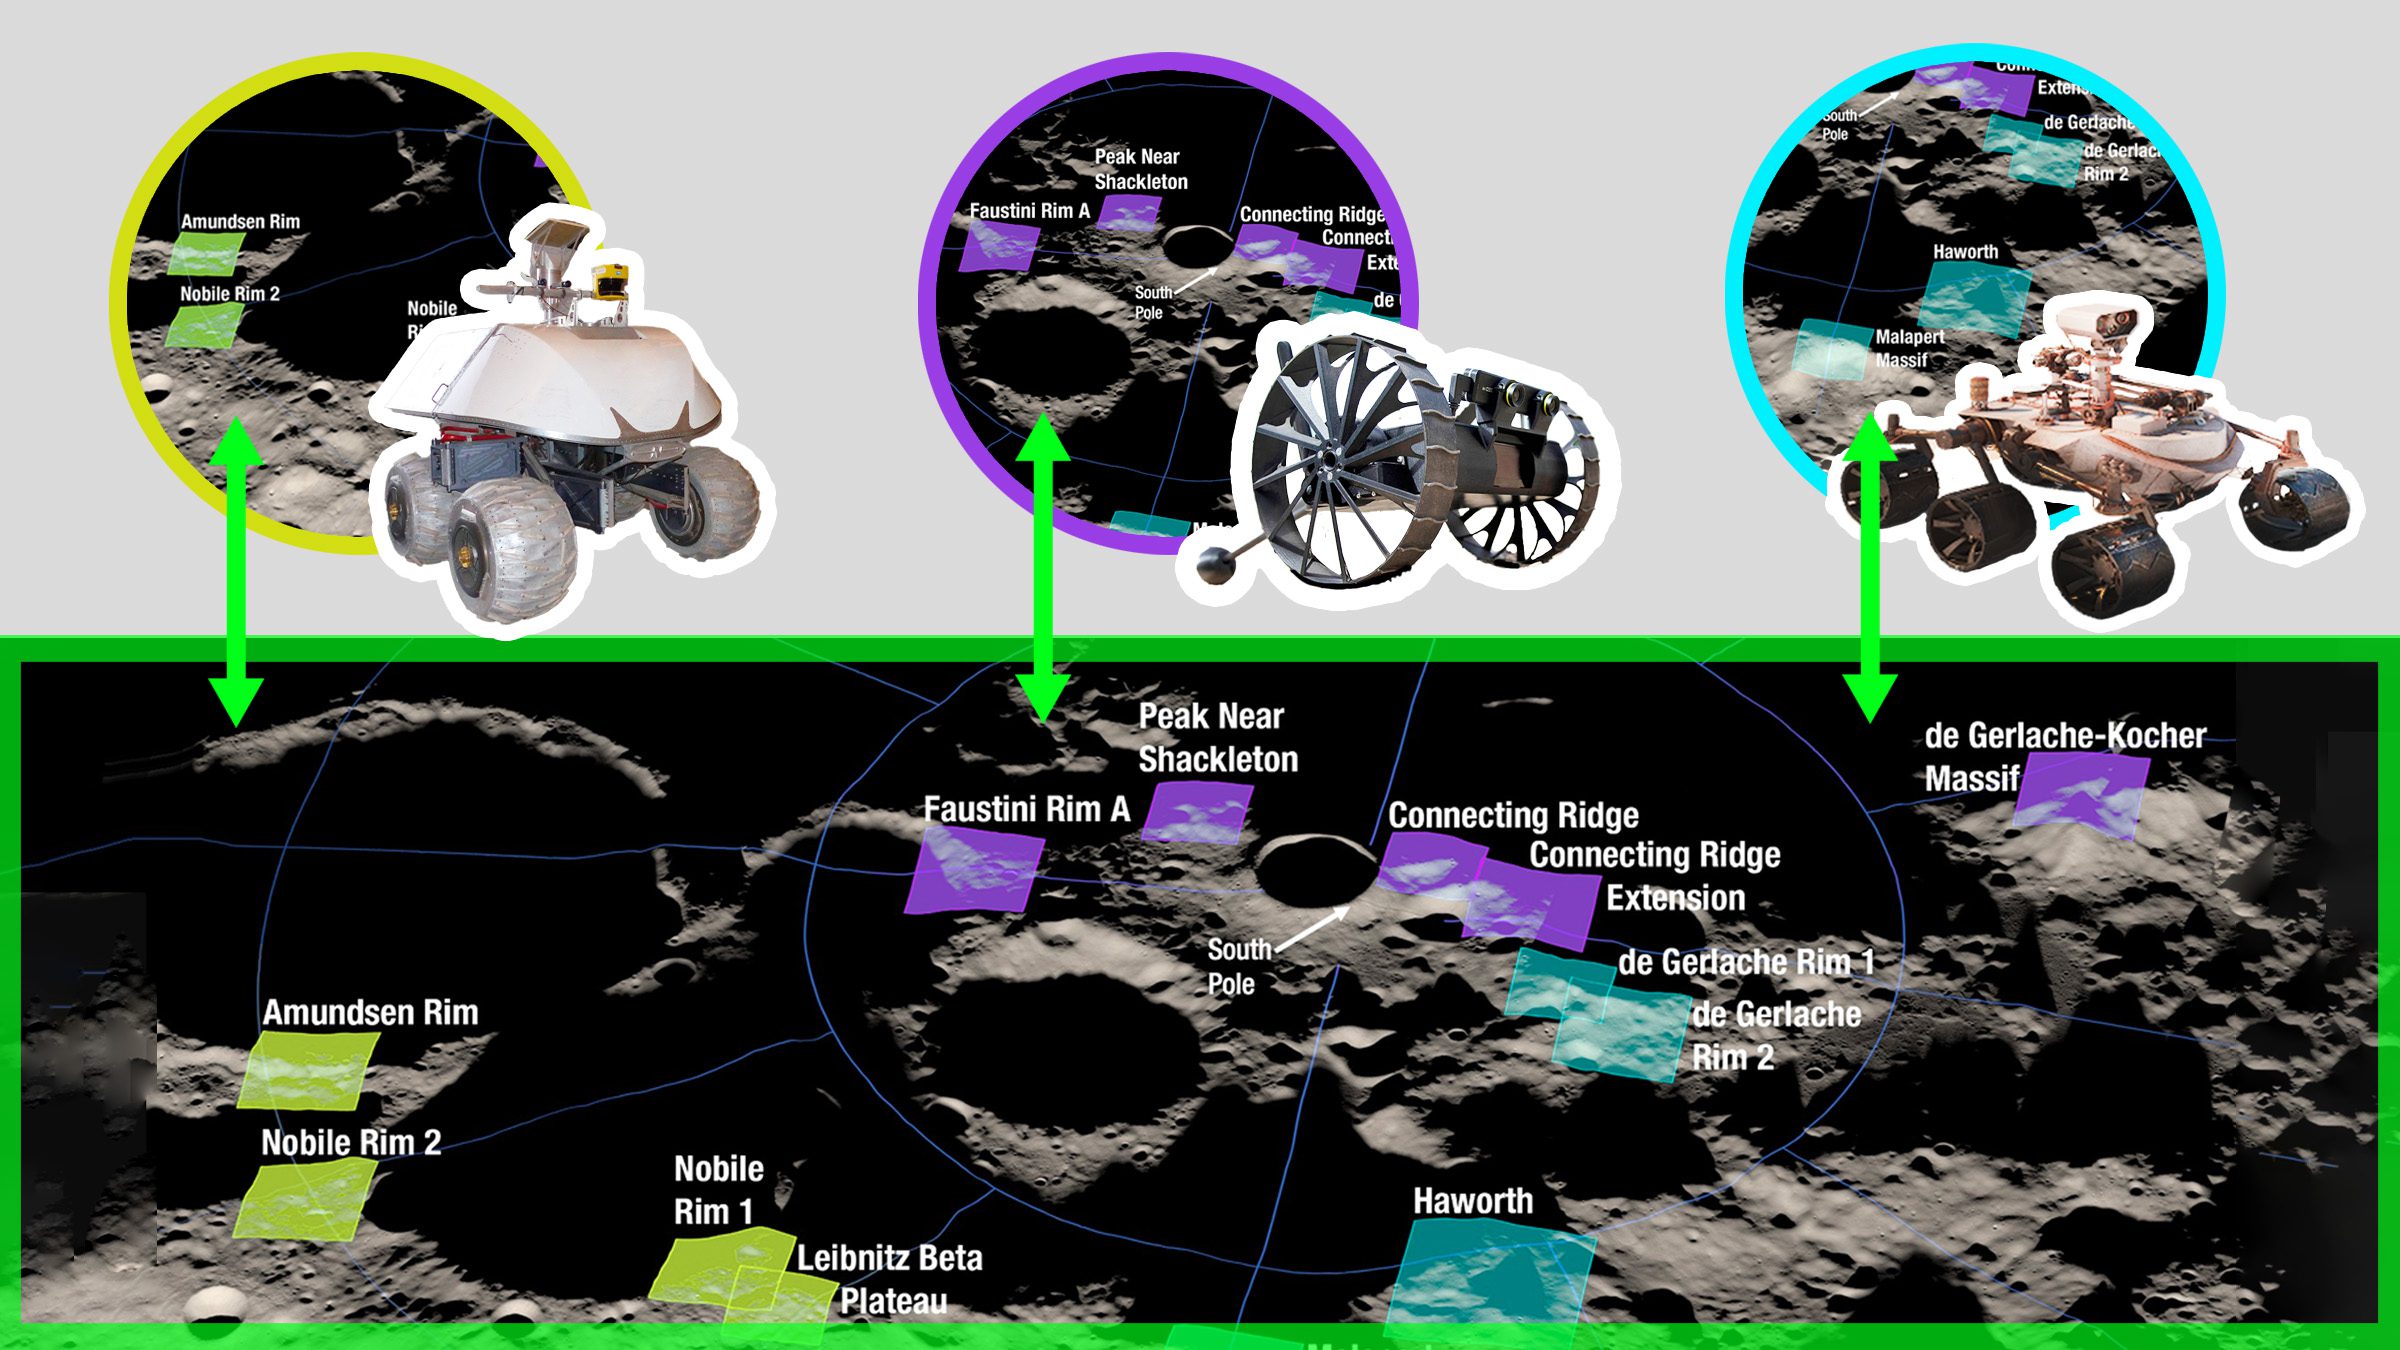 Illustration of different robots on the moon and lunar surface locations identified